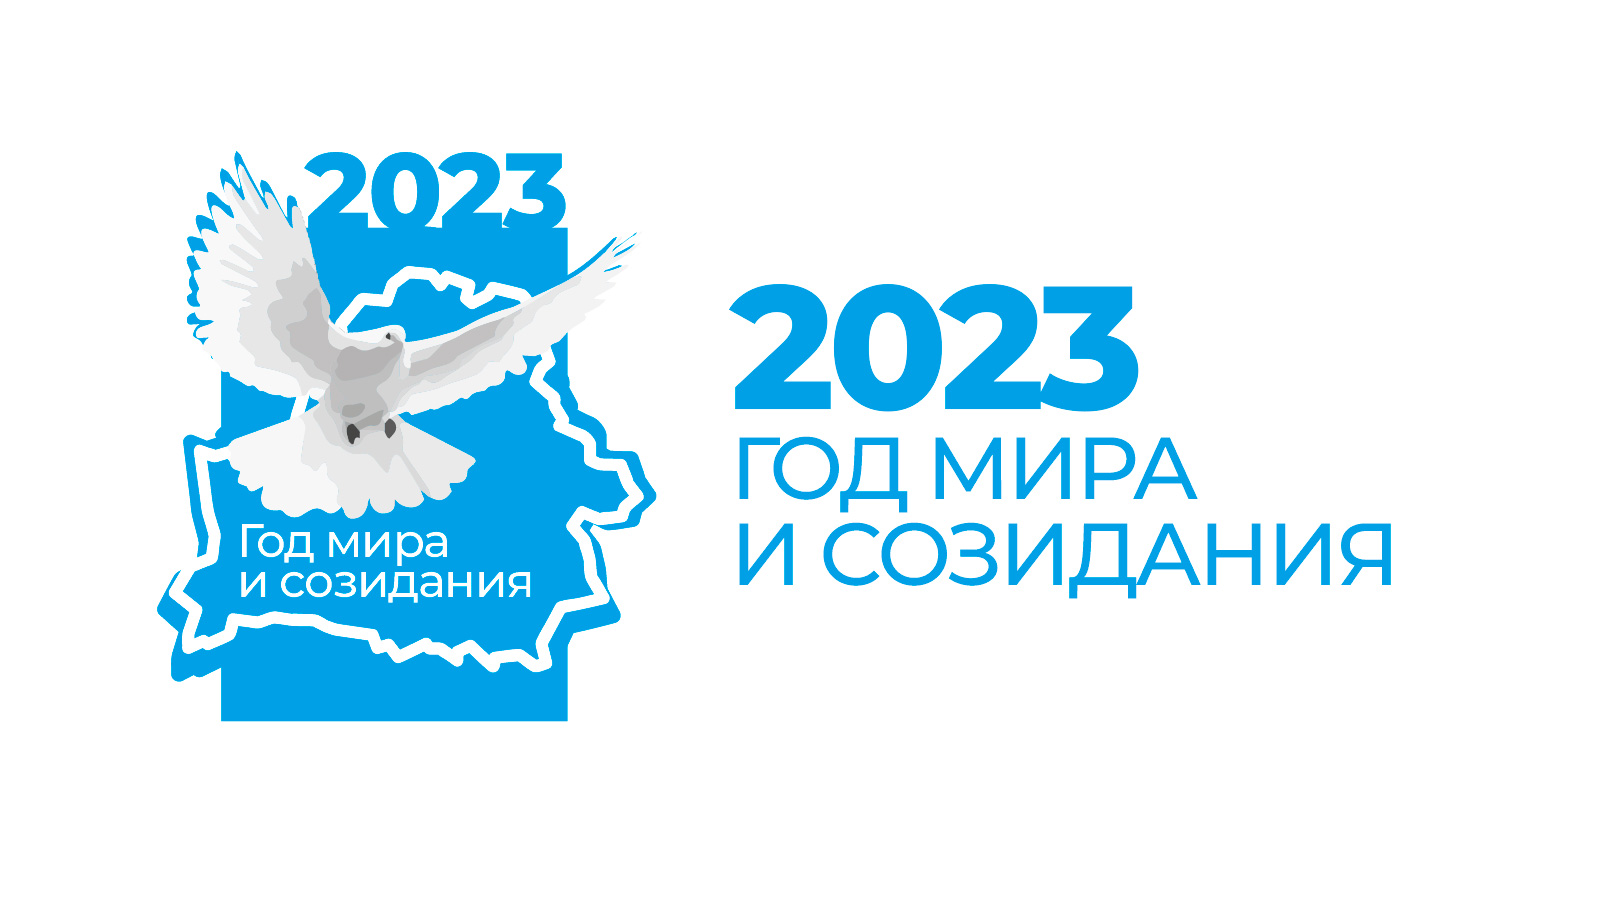 2023: Year of Peace and Creation